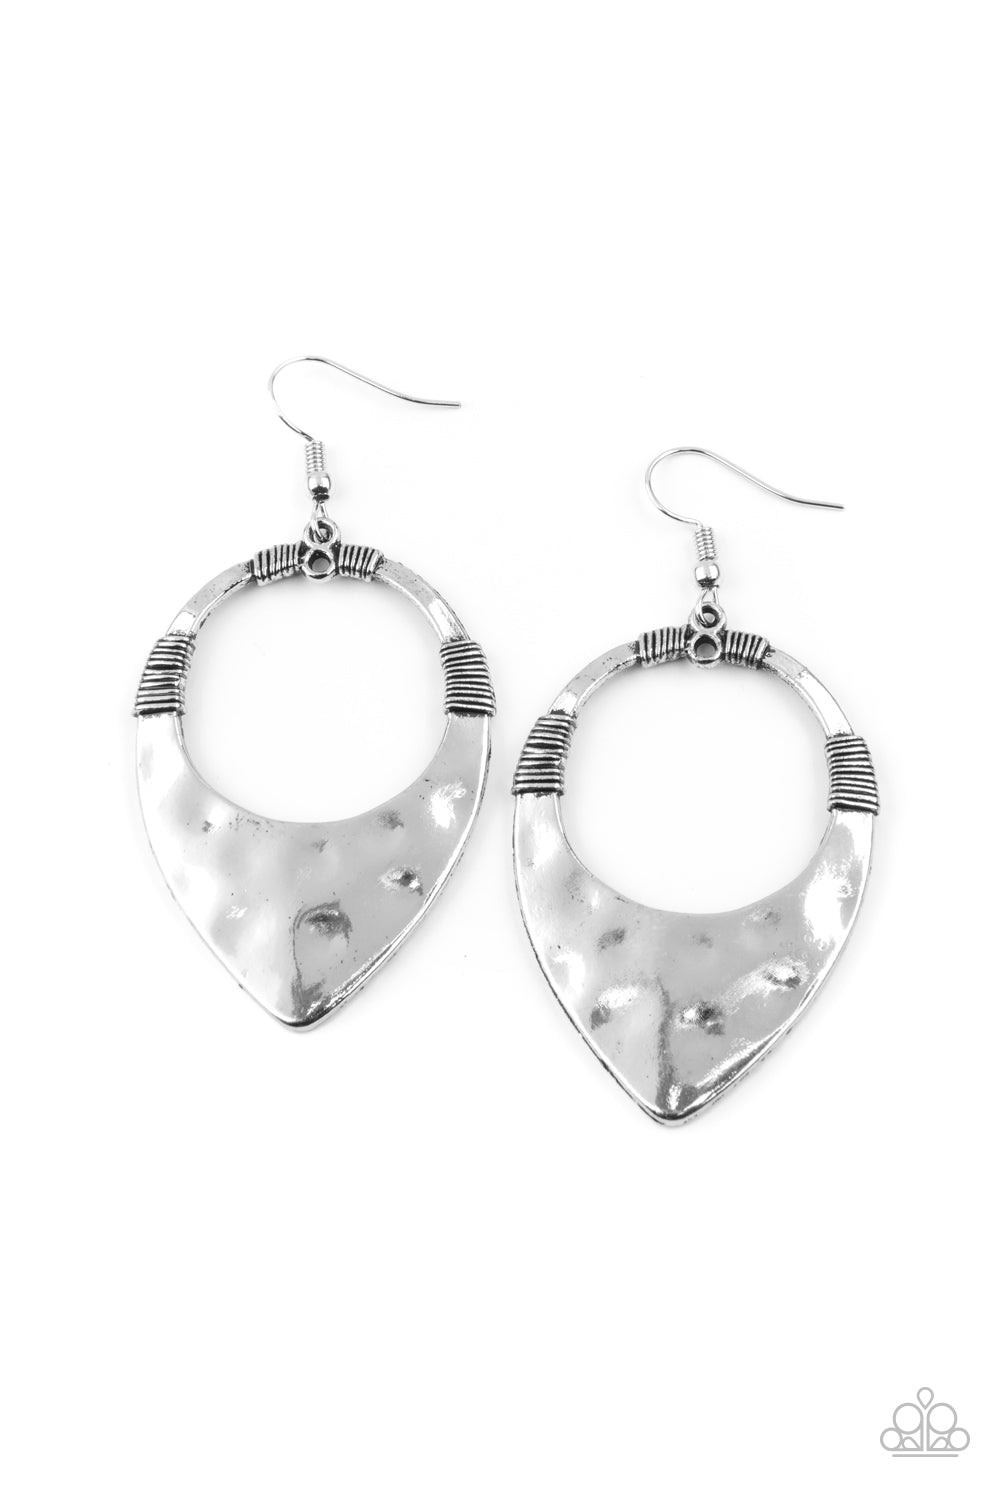 Instinctively Industrial - Silver Teardrop Fashion Earrings - Paparazzi Accessories - Hammered silver teardrop-like frame swings from the ear for an artisan inspired look. Earring attaches to a standard fishhook fitting.